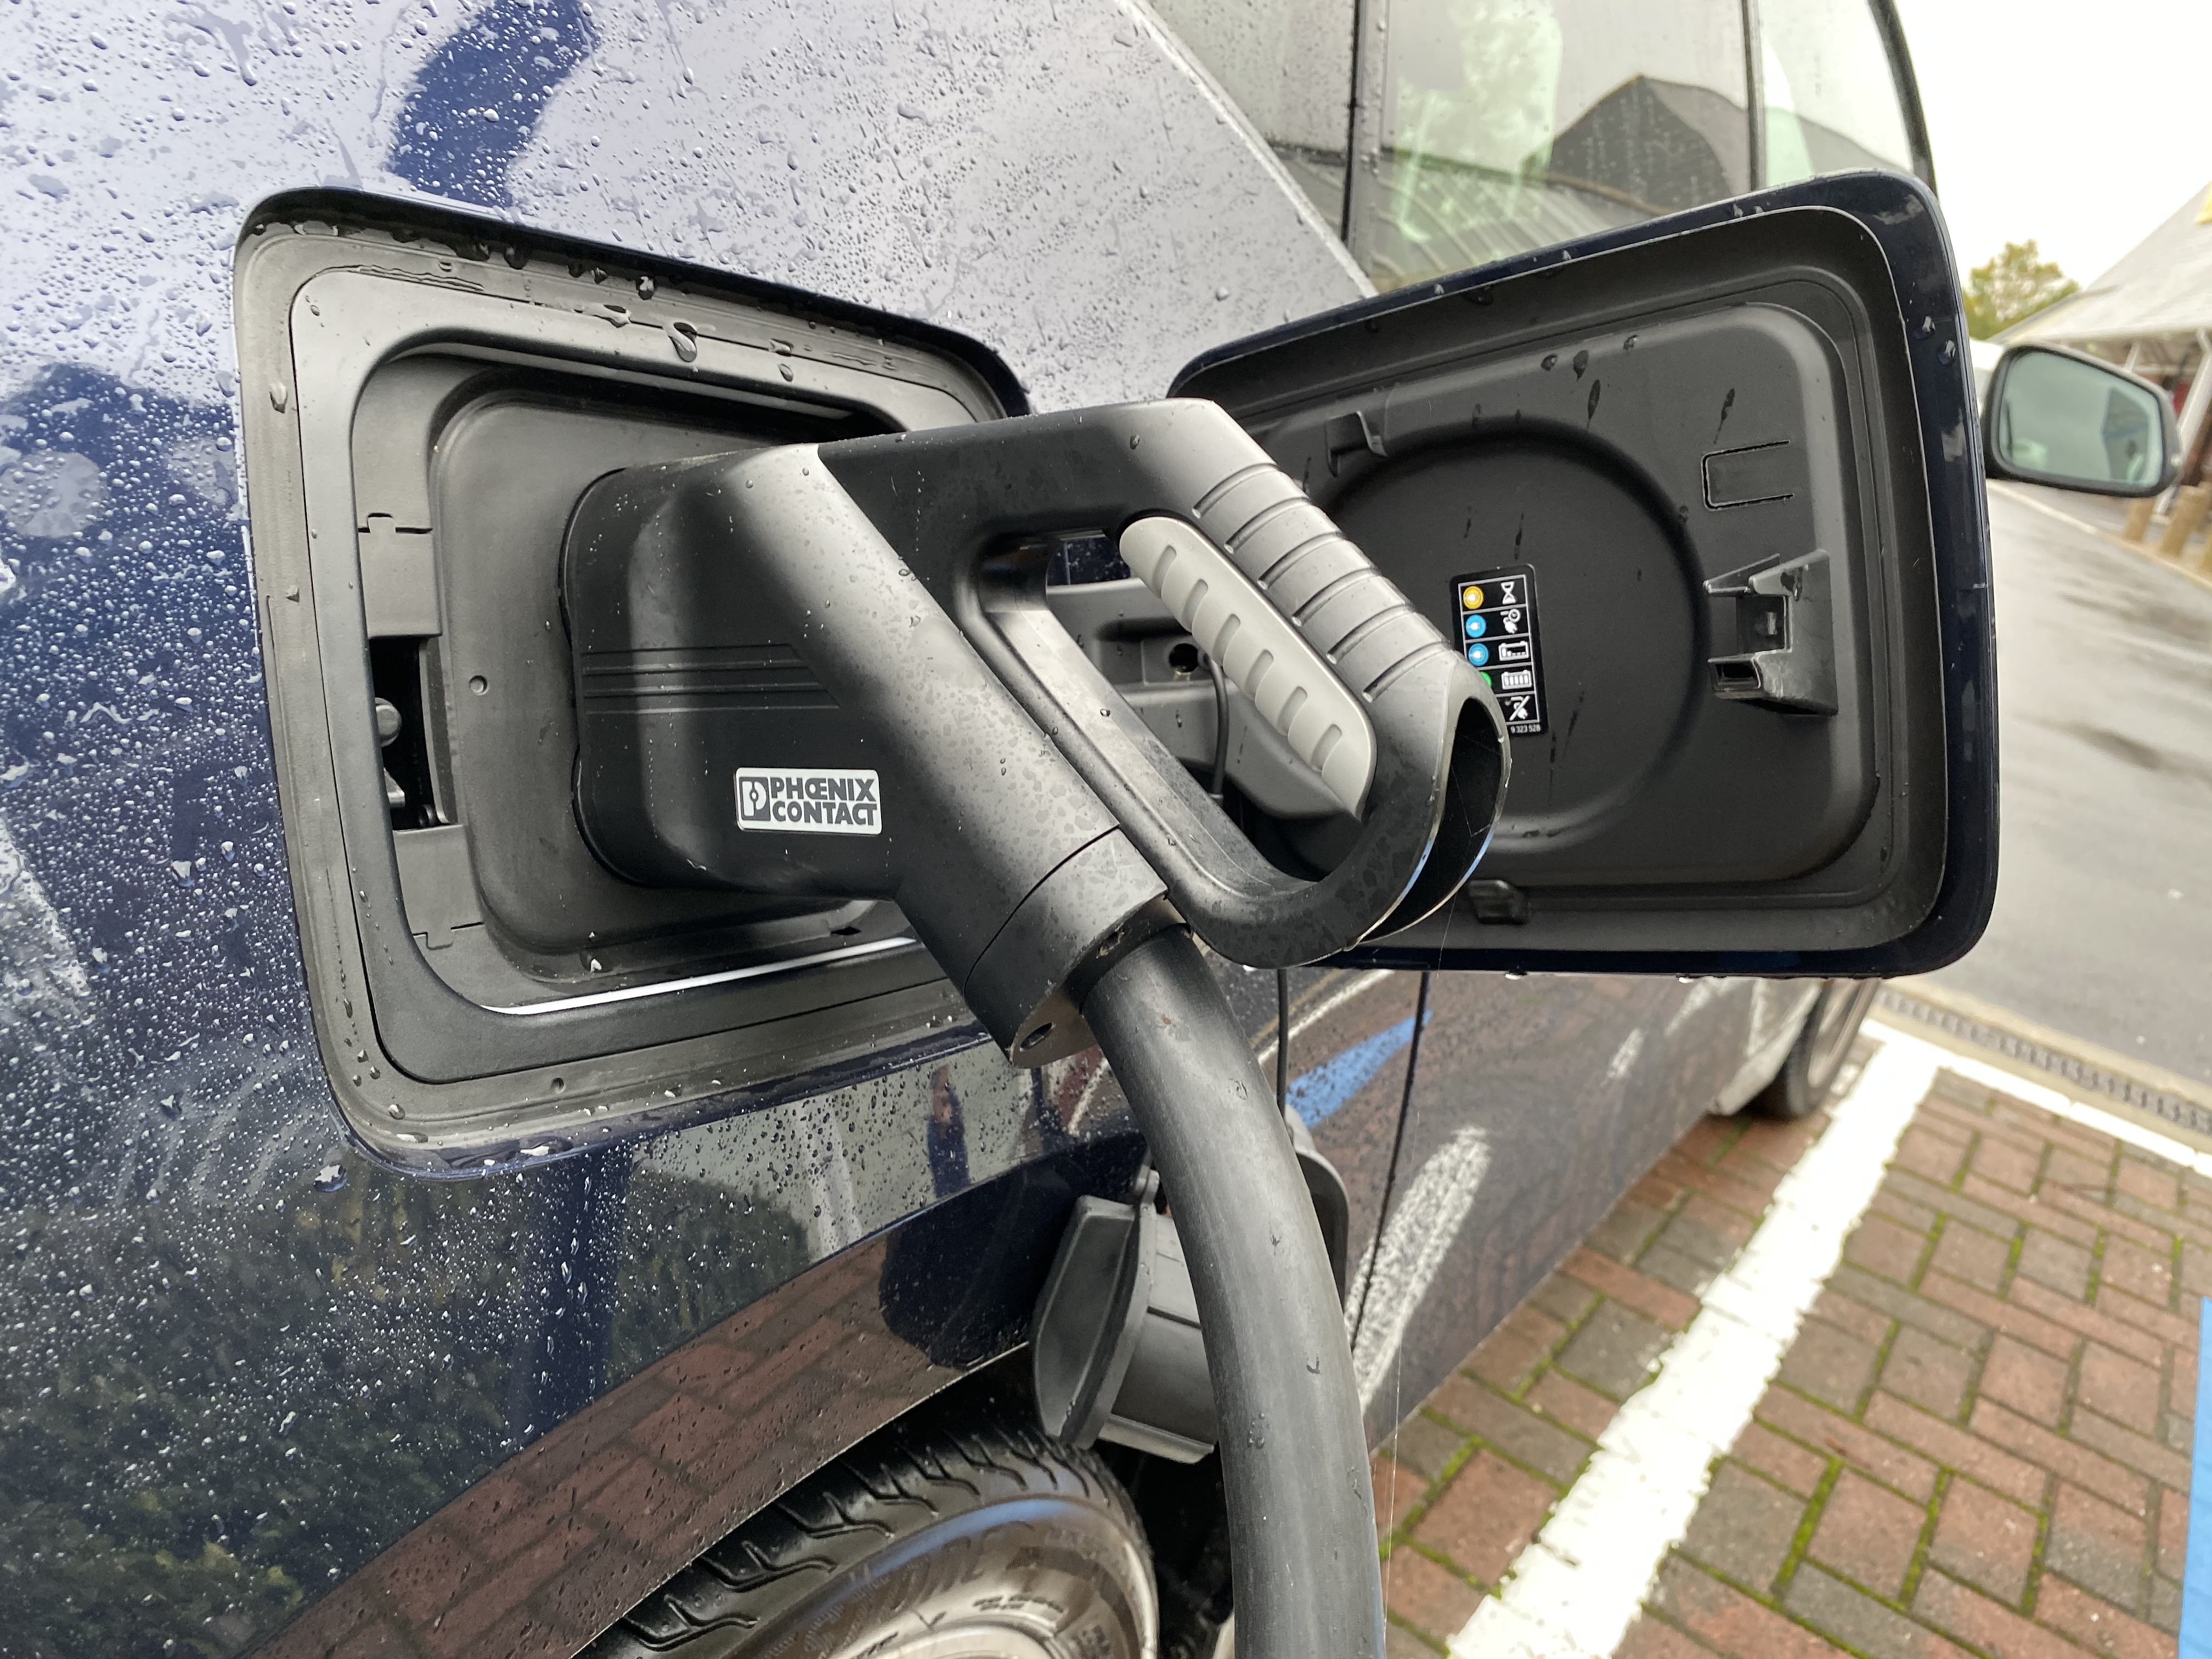 Charging the car is a simple process